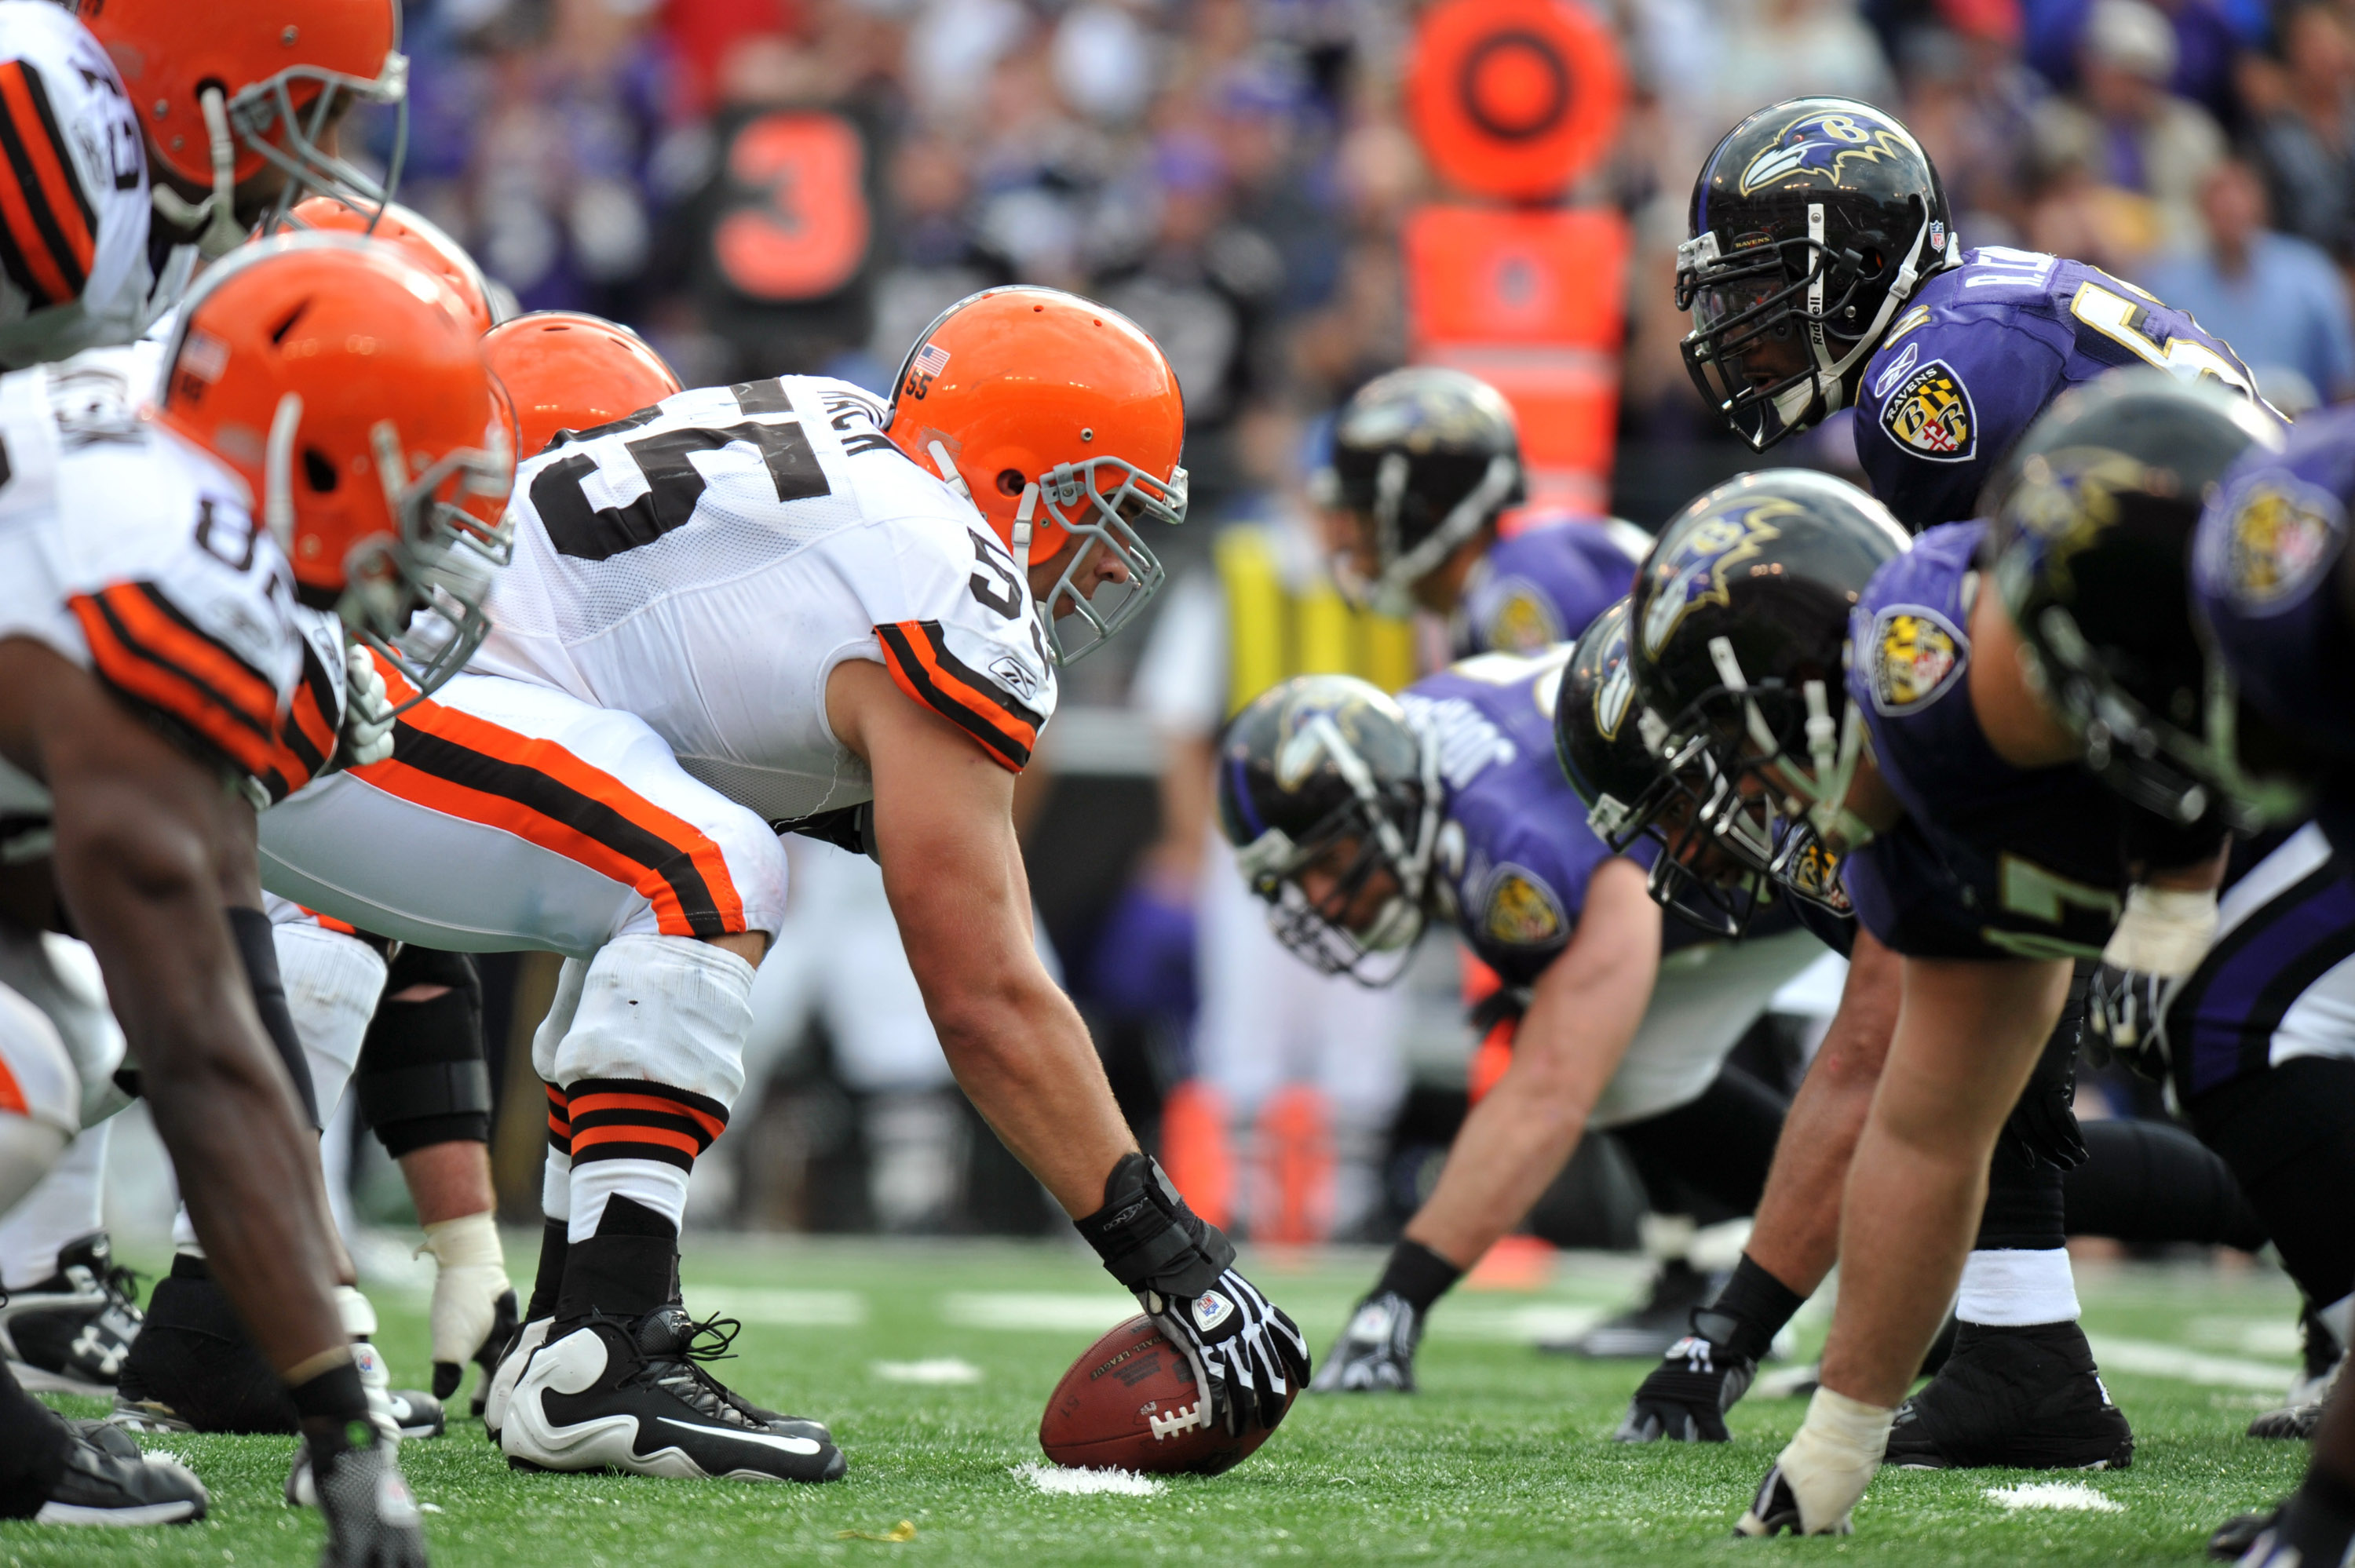 BALTIMORE - SEPTEMBER 26:  Alex Mack #55 of the Cleveland Browns snaps the ball against the Baltimore Ravens  at M&T Bank Stadium on September 26, 2010 in Baltimore, Maryland. The Ravens defeated the Browns 24-17. (Photo by Larry French/Getty Images)